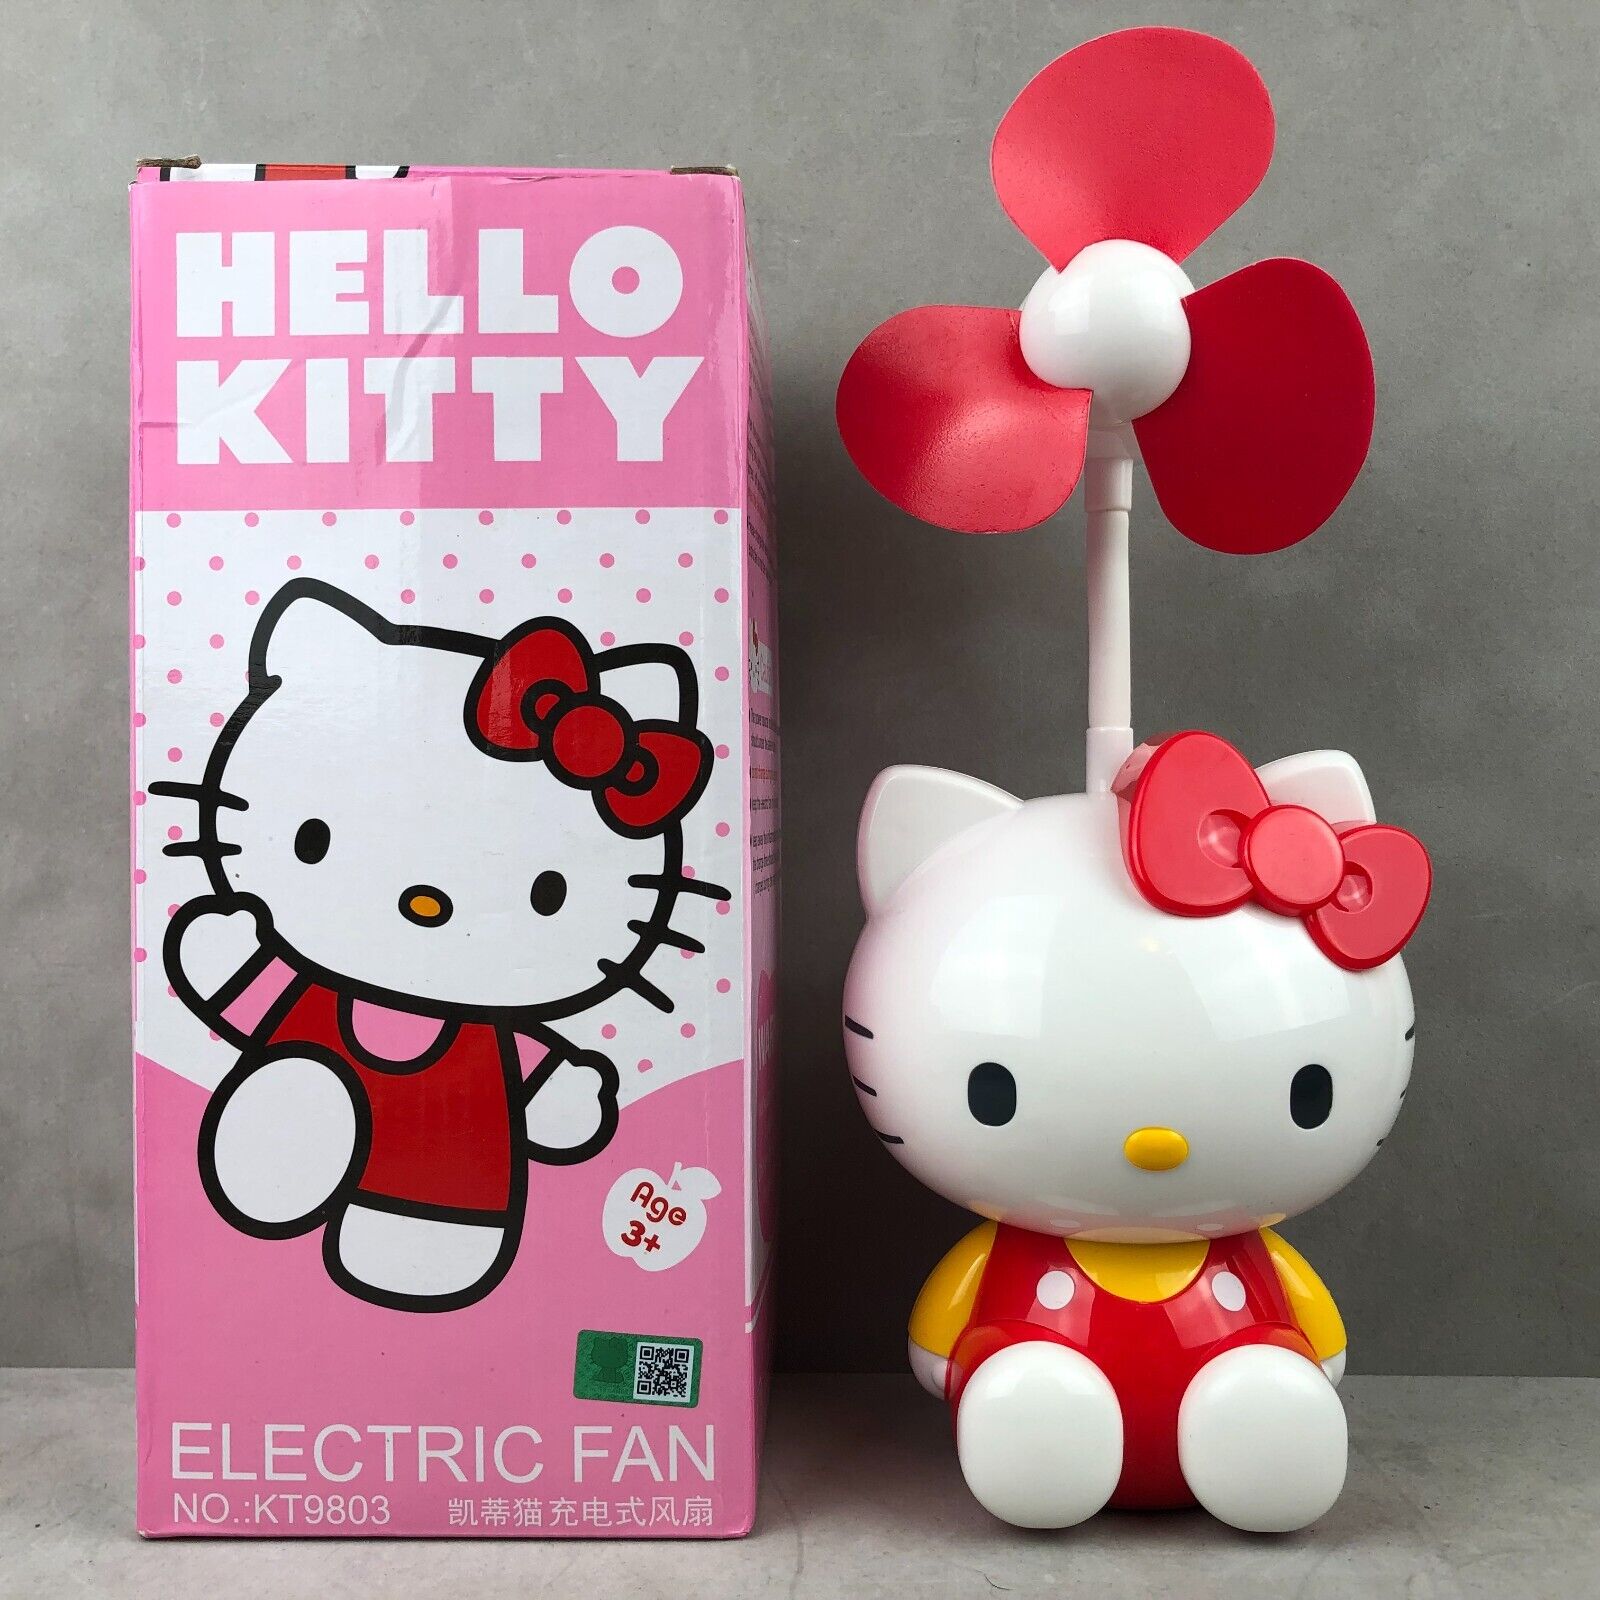 RARE 2016 Sanrio Official Hello Kitty Rechargeable Electric Fan Red KT9803 Japan